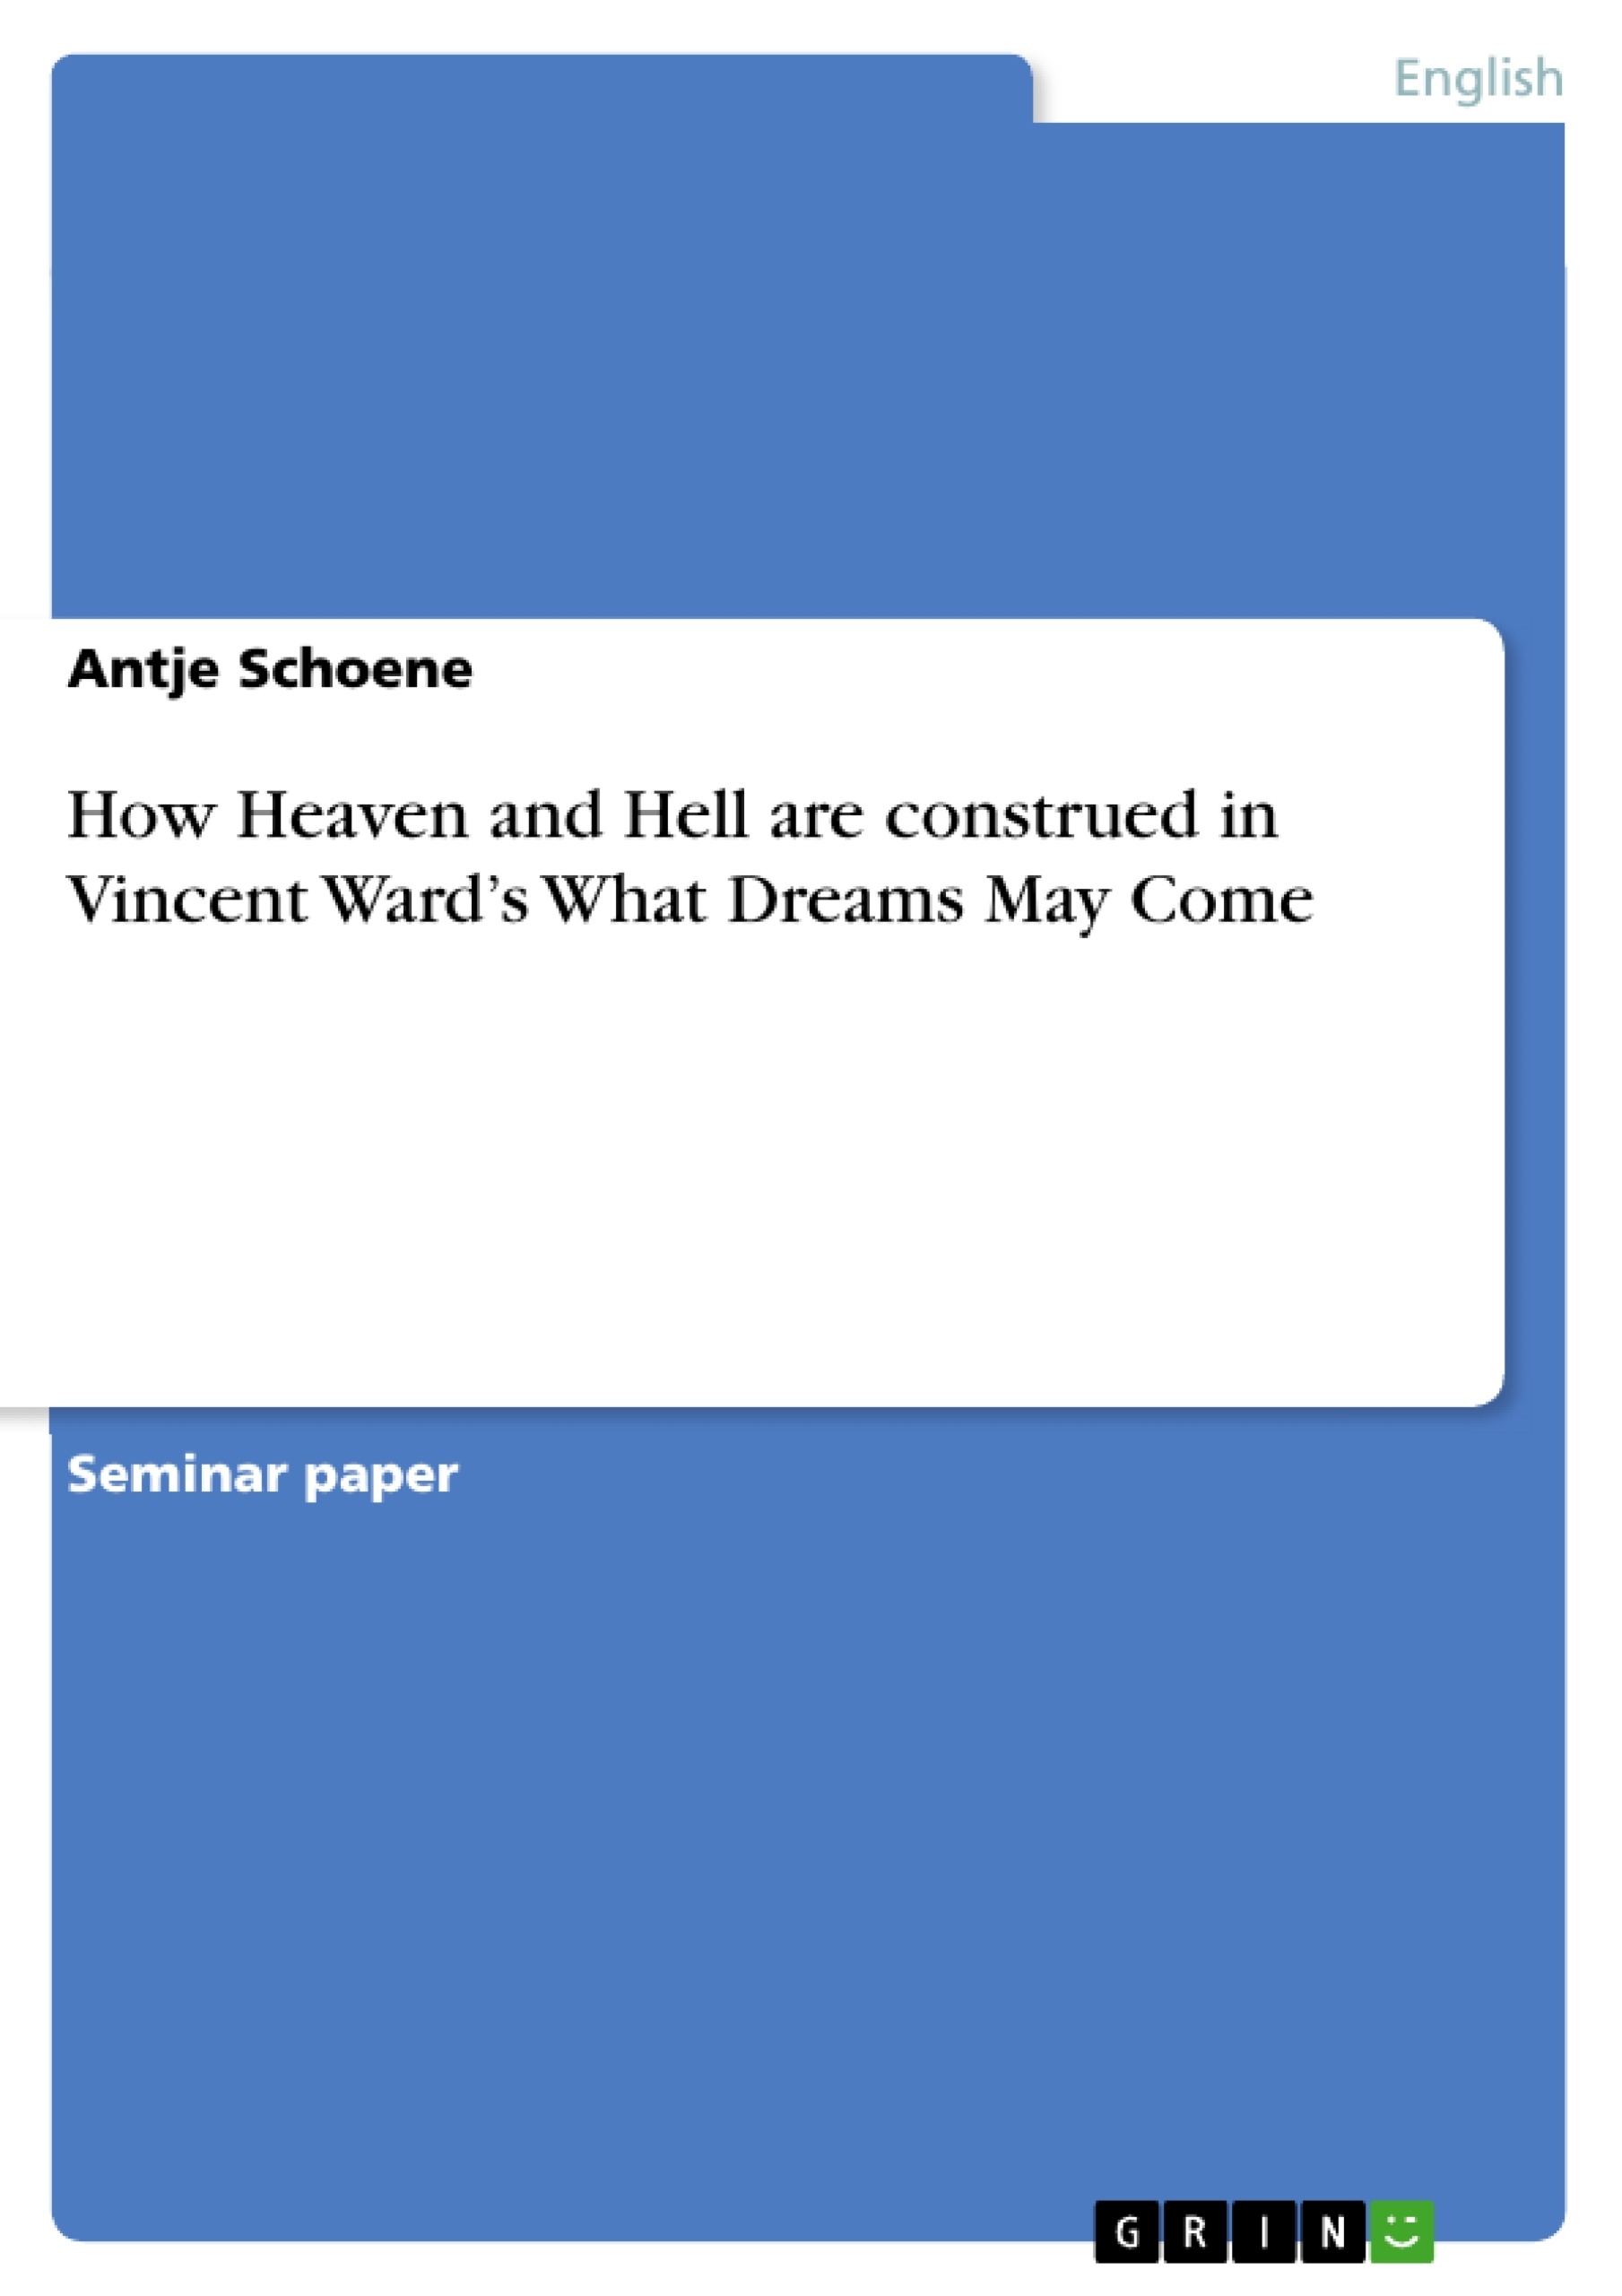 Title: How Heaven and Hell are construed in Vincent Ward’s What Dreams May Come